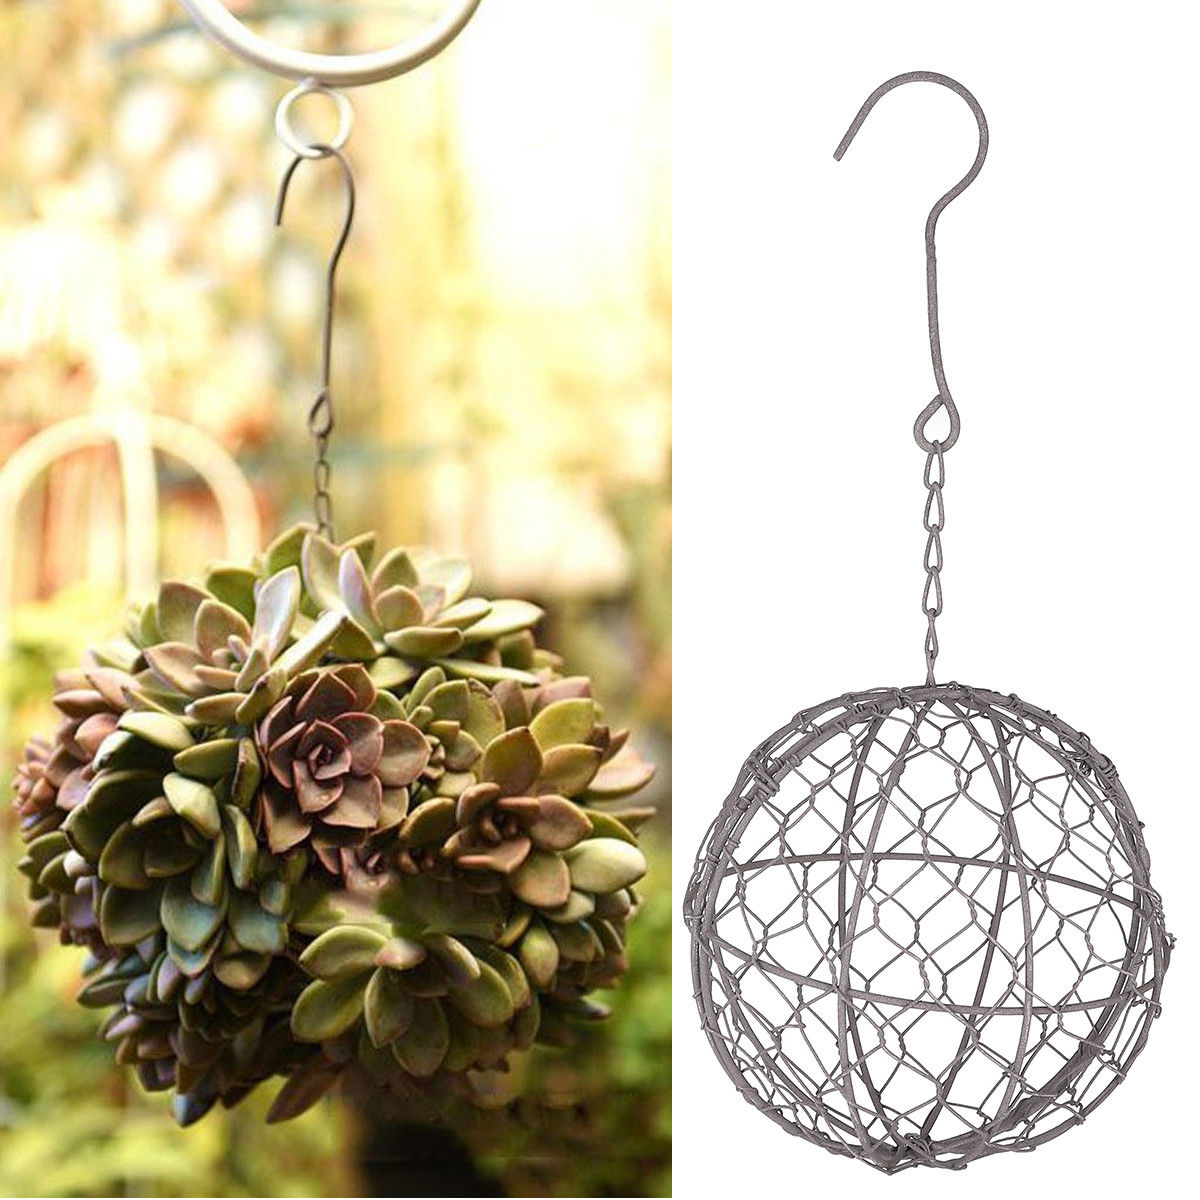 

Hanging Planters Flower Pot Iron Iron Wire Succulent Pot Wall Succulent Planters Rustic Plant Holder Decorations